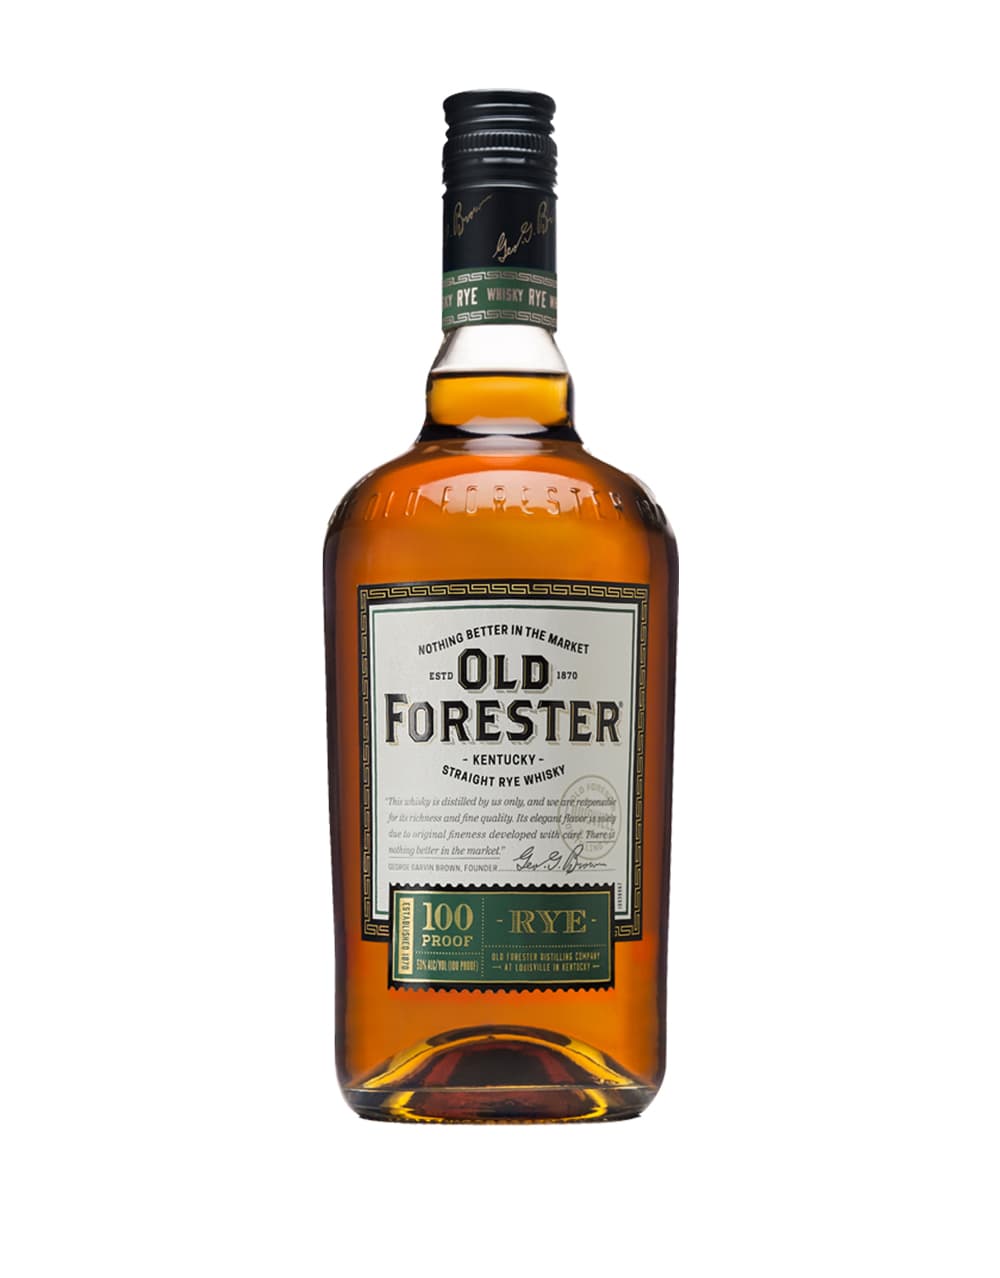 Old Forester Kentucky Straight Rye Whisky